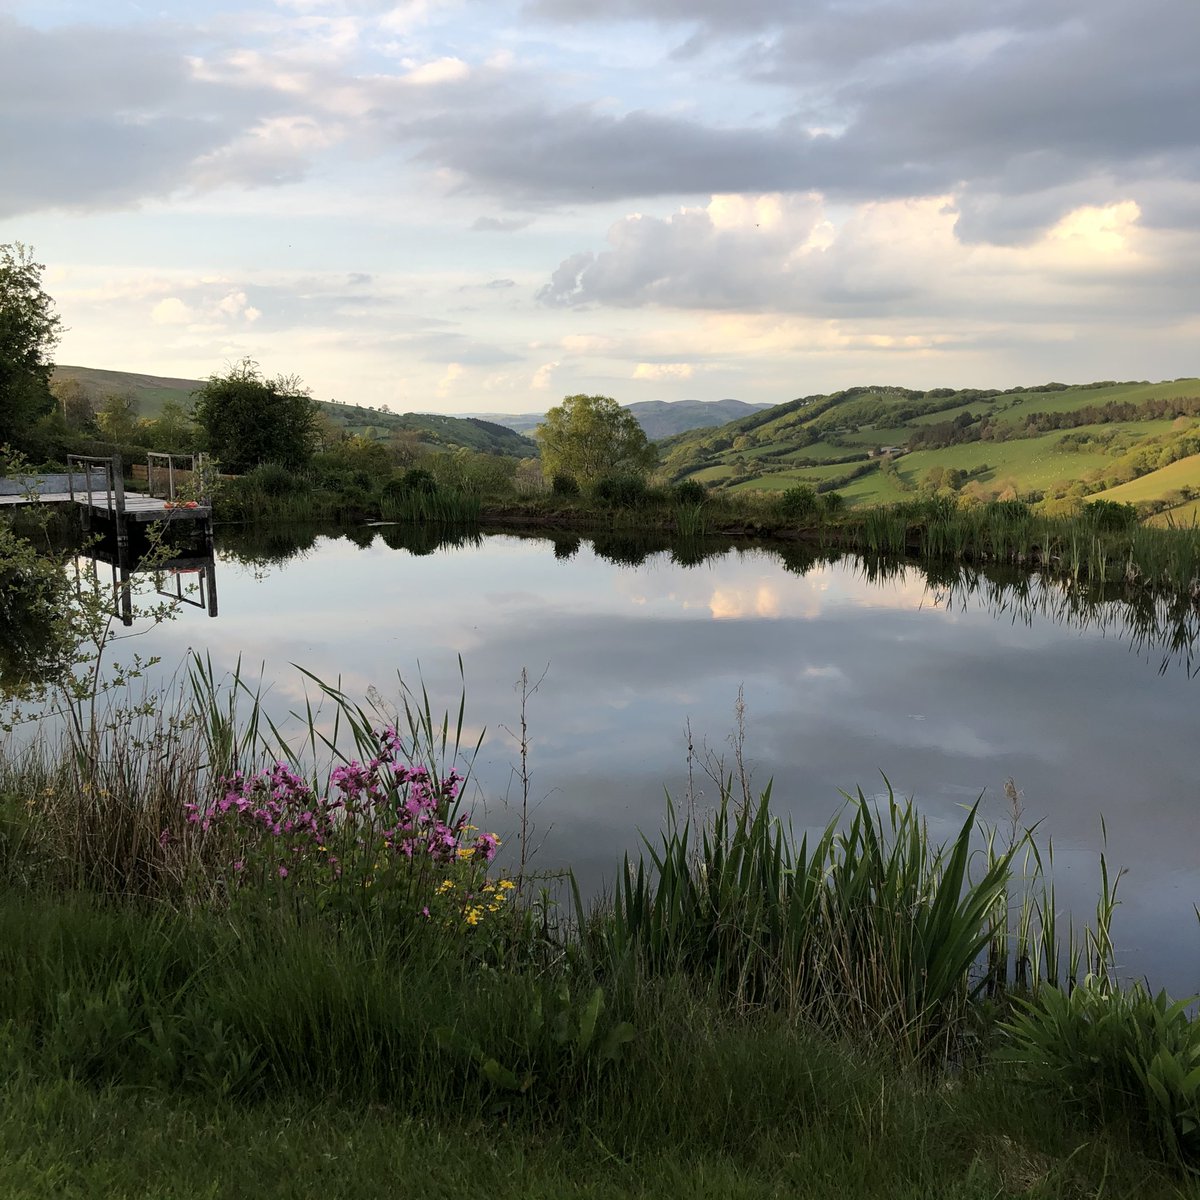 What an evening #cloud #wildswimming #pond #lavenderfarm #redcampion #sunset #evening #field #hedgerow #powys #wales We hope to welcome glampers to the farm again soon to visit the lavender fields and to stay @pantechnicon_powys